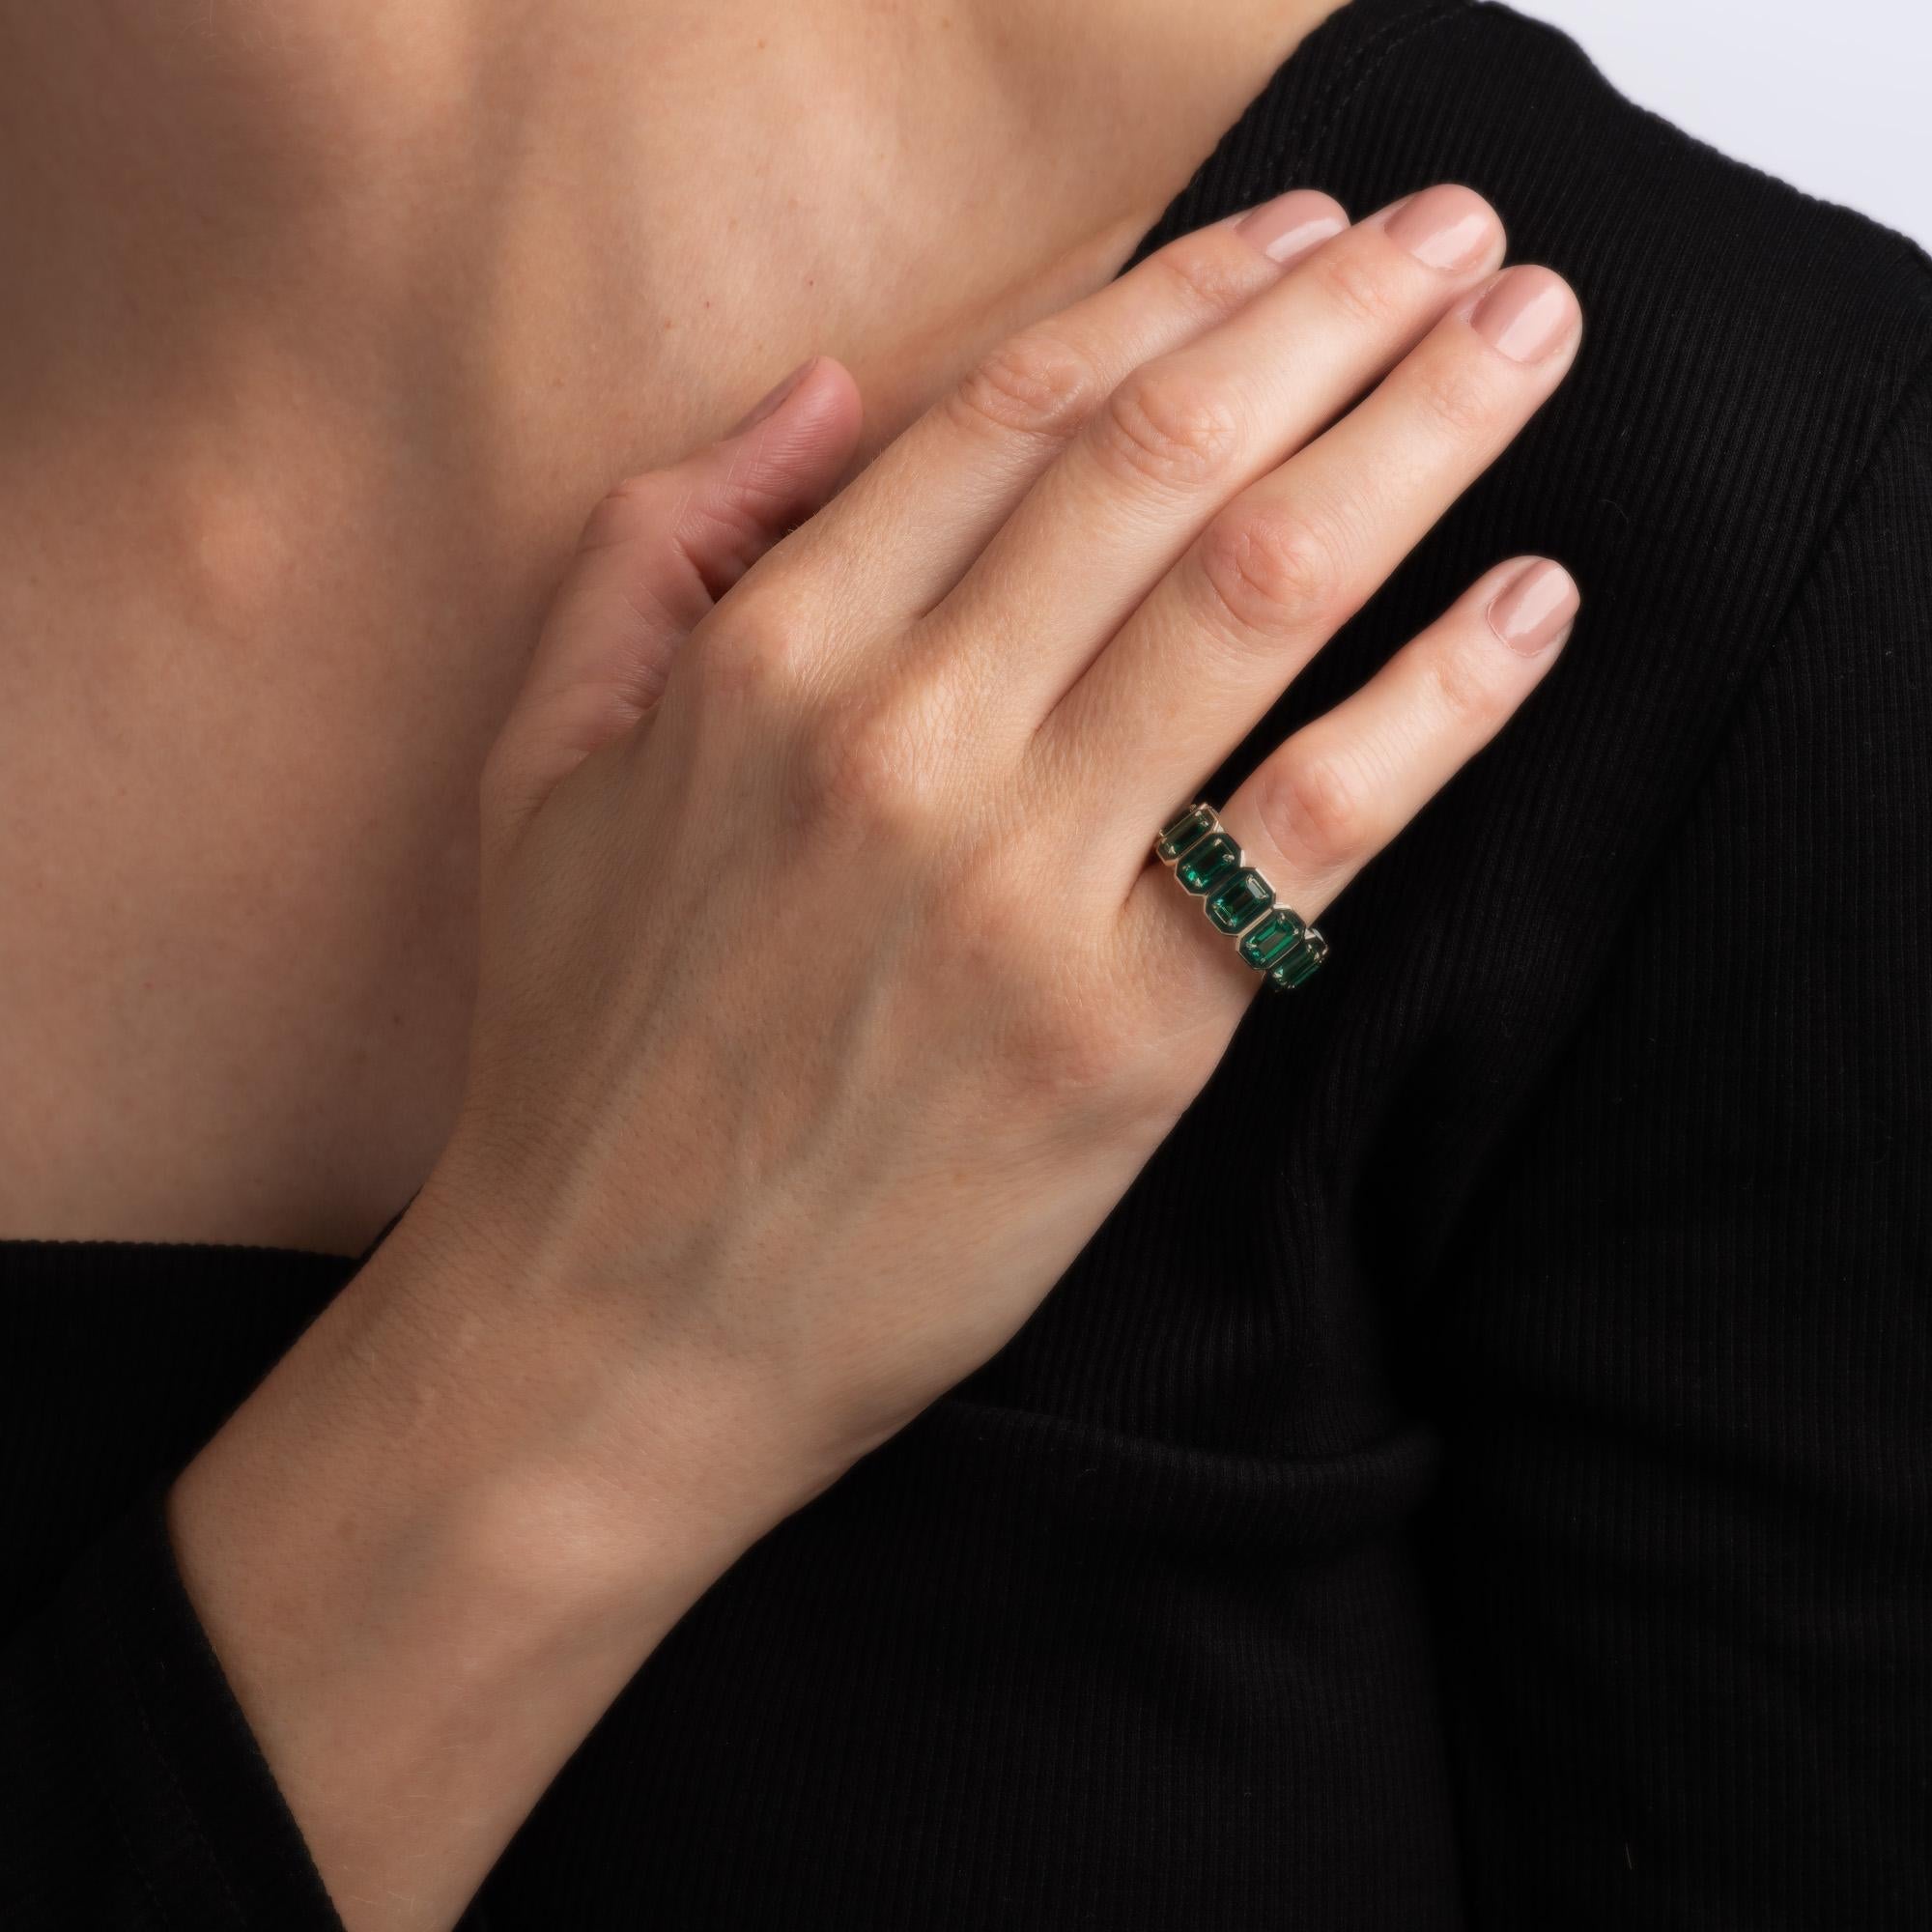 Overview:

Stylish pre-owned Alison Lou created emerald rectangular eternity ring crafted in 14 karat yellow gold. 

Created emeralds each measure 4.5mm x 3mm. The stones are in very good condition and free of cracks or chips. 

The eternity band